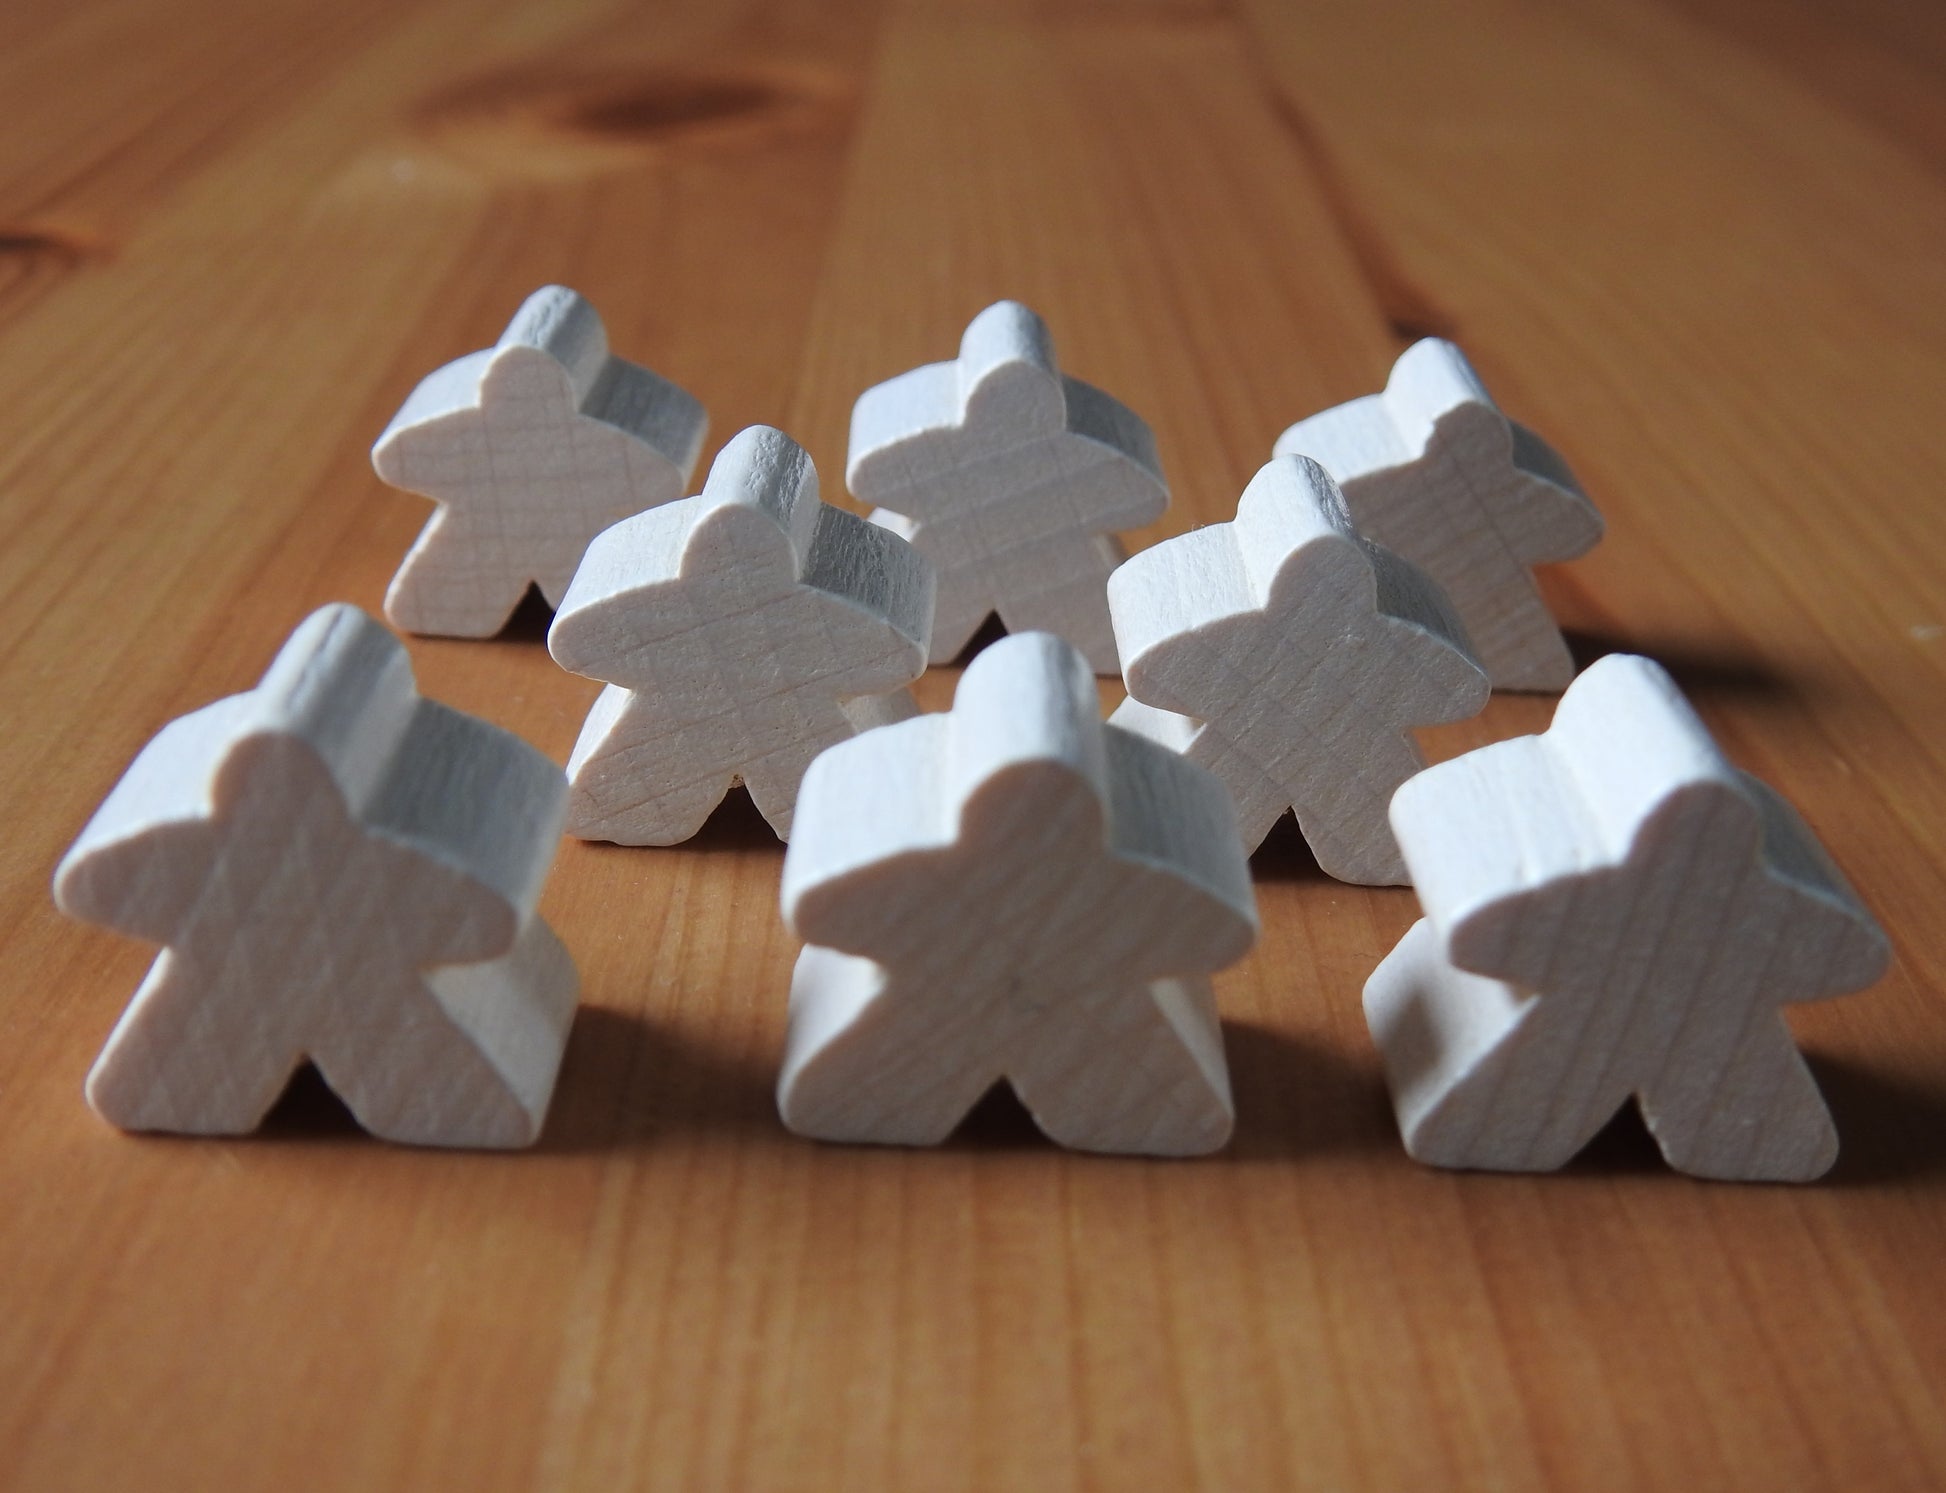 Close-up view of the white set of 8 meeples.